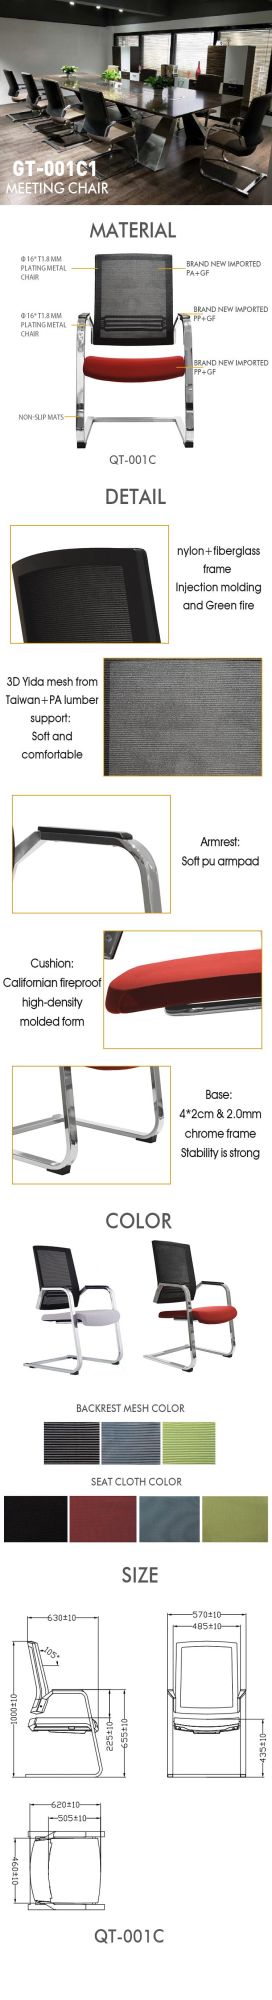 Available Metal Huy Stand Export Packing Office Chairs Conference Chair